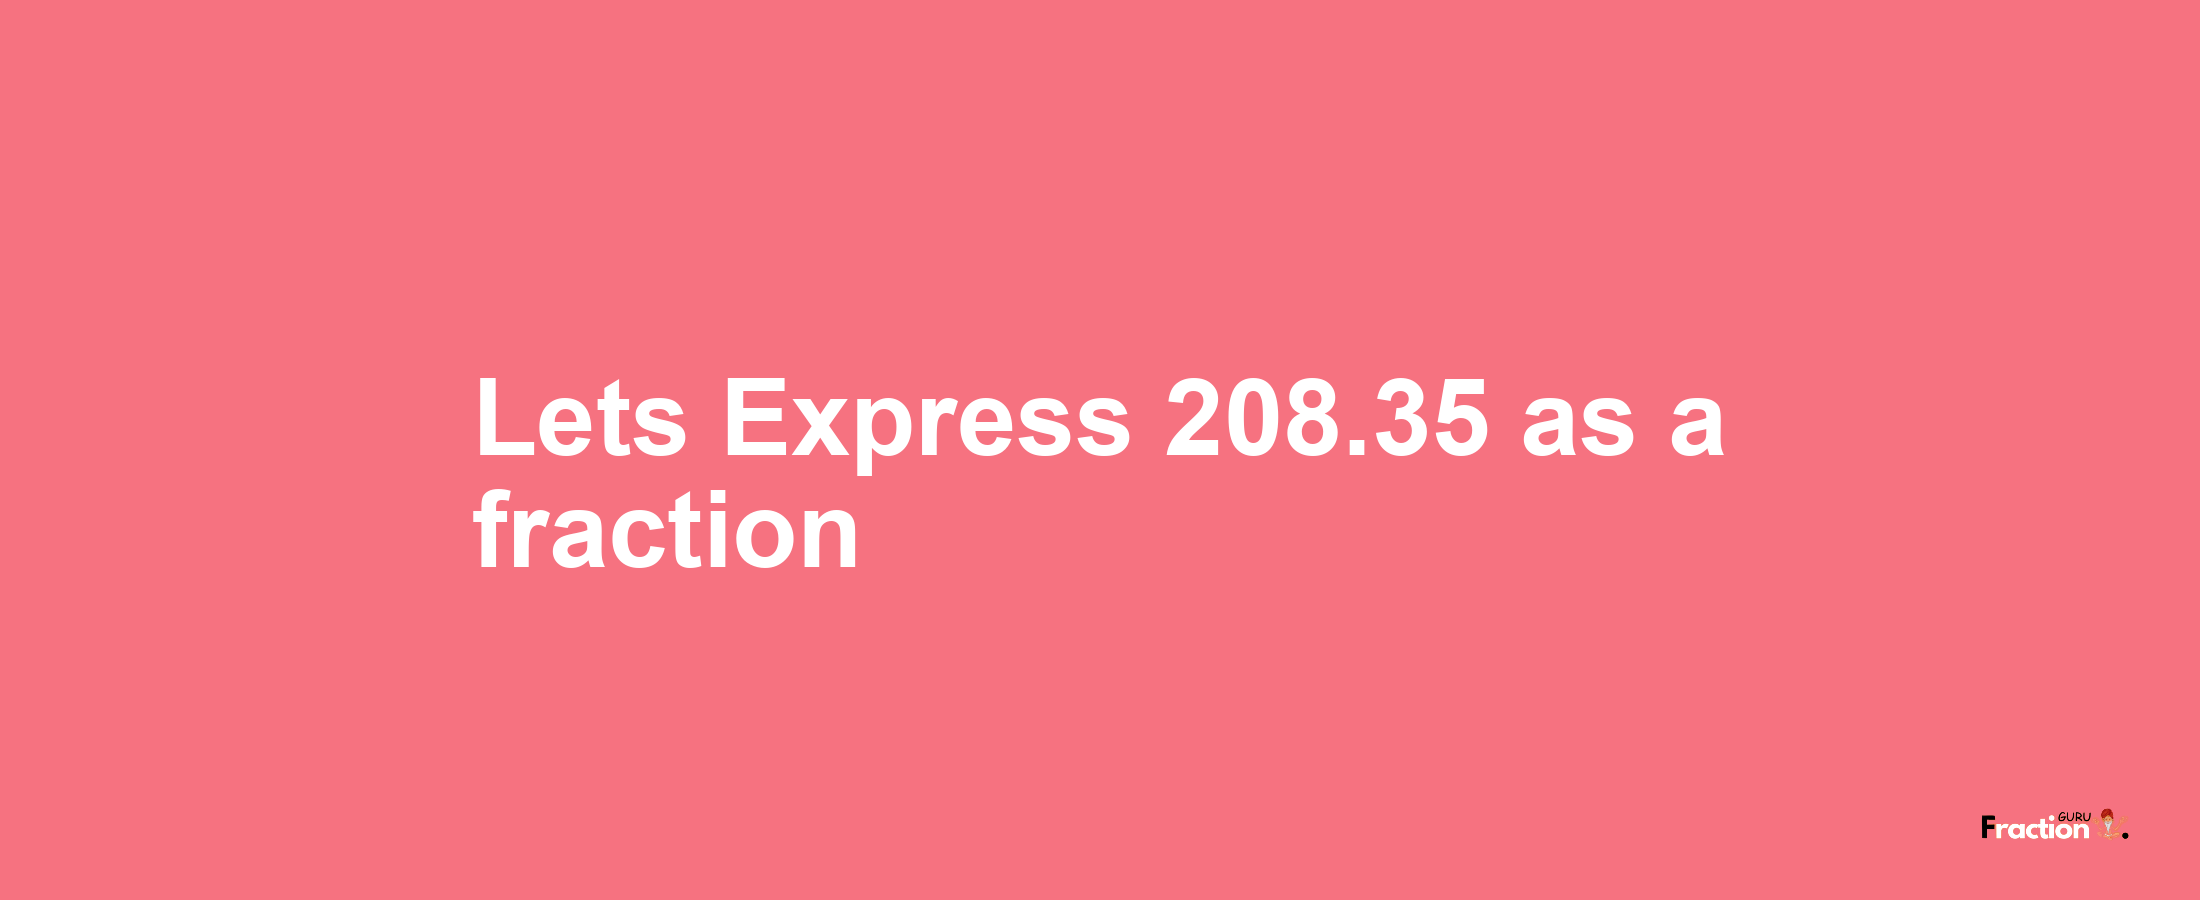 Lets Express 208.35 as afraction